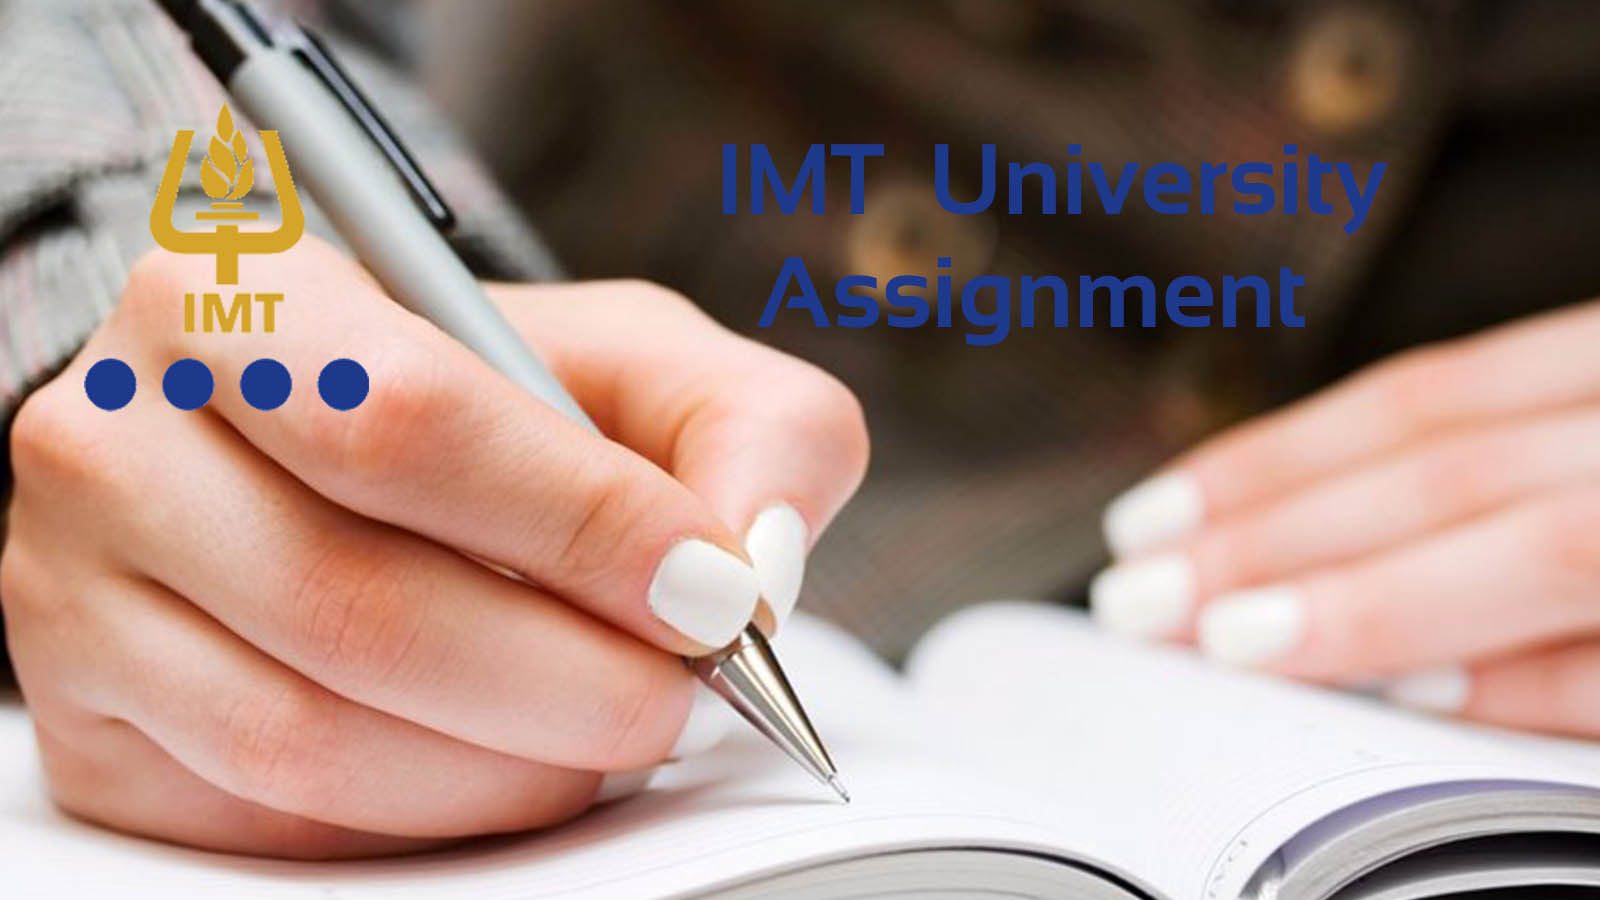 IMT Two Year PGDM Solve Assignment For IMTC631 Legal & Regulatory Environment of Business